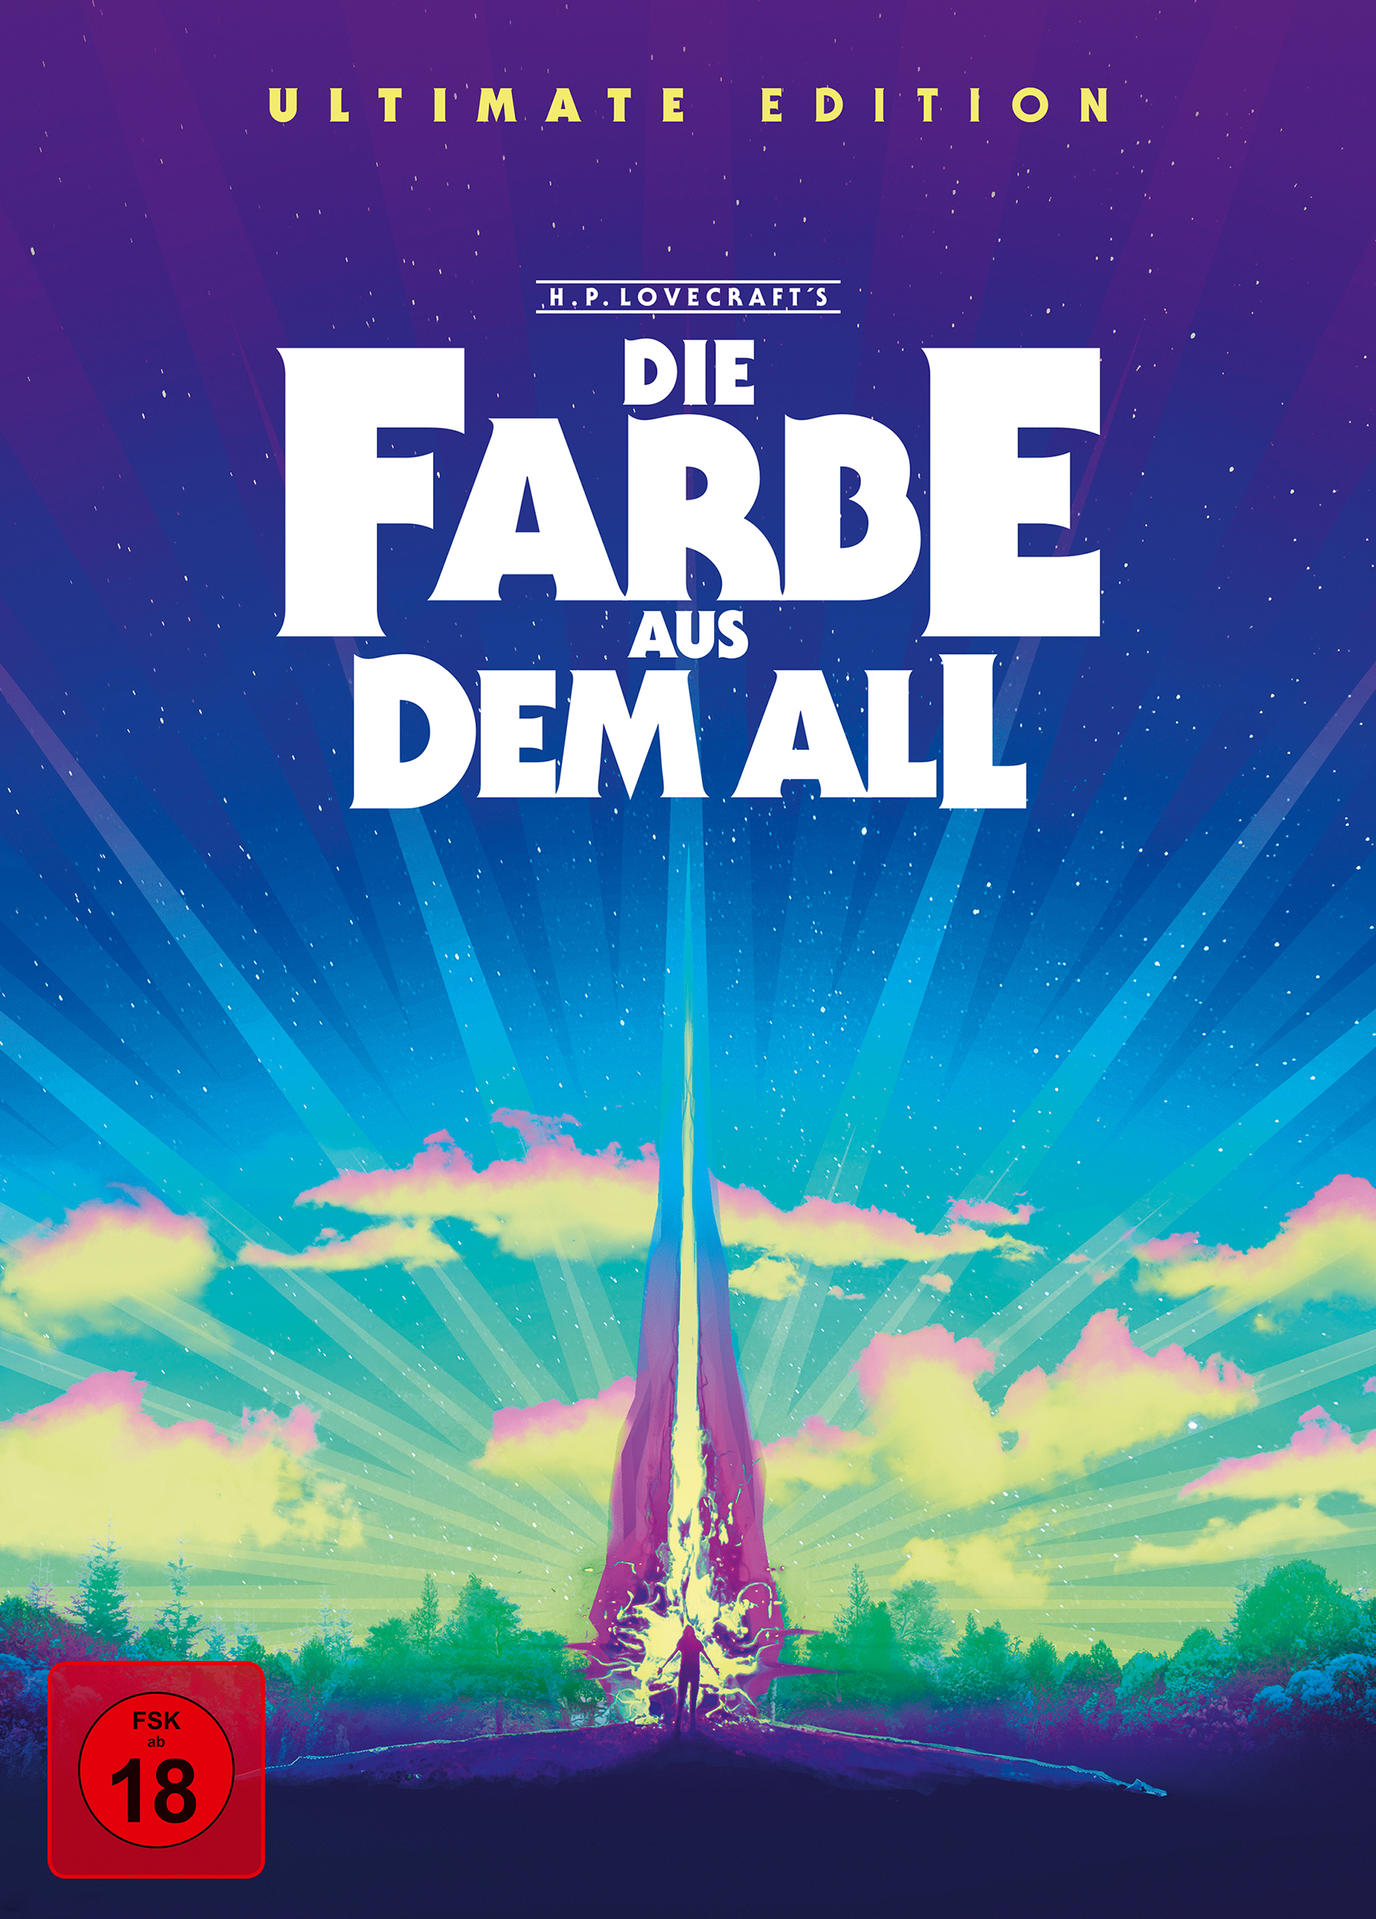 Die Farbe aus dem All Blu-ray Out Blu-rays + Edition, + of 4K CD) HD (Ultimate - Ultra UHD Color 5 Space